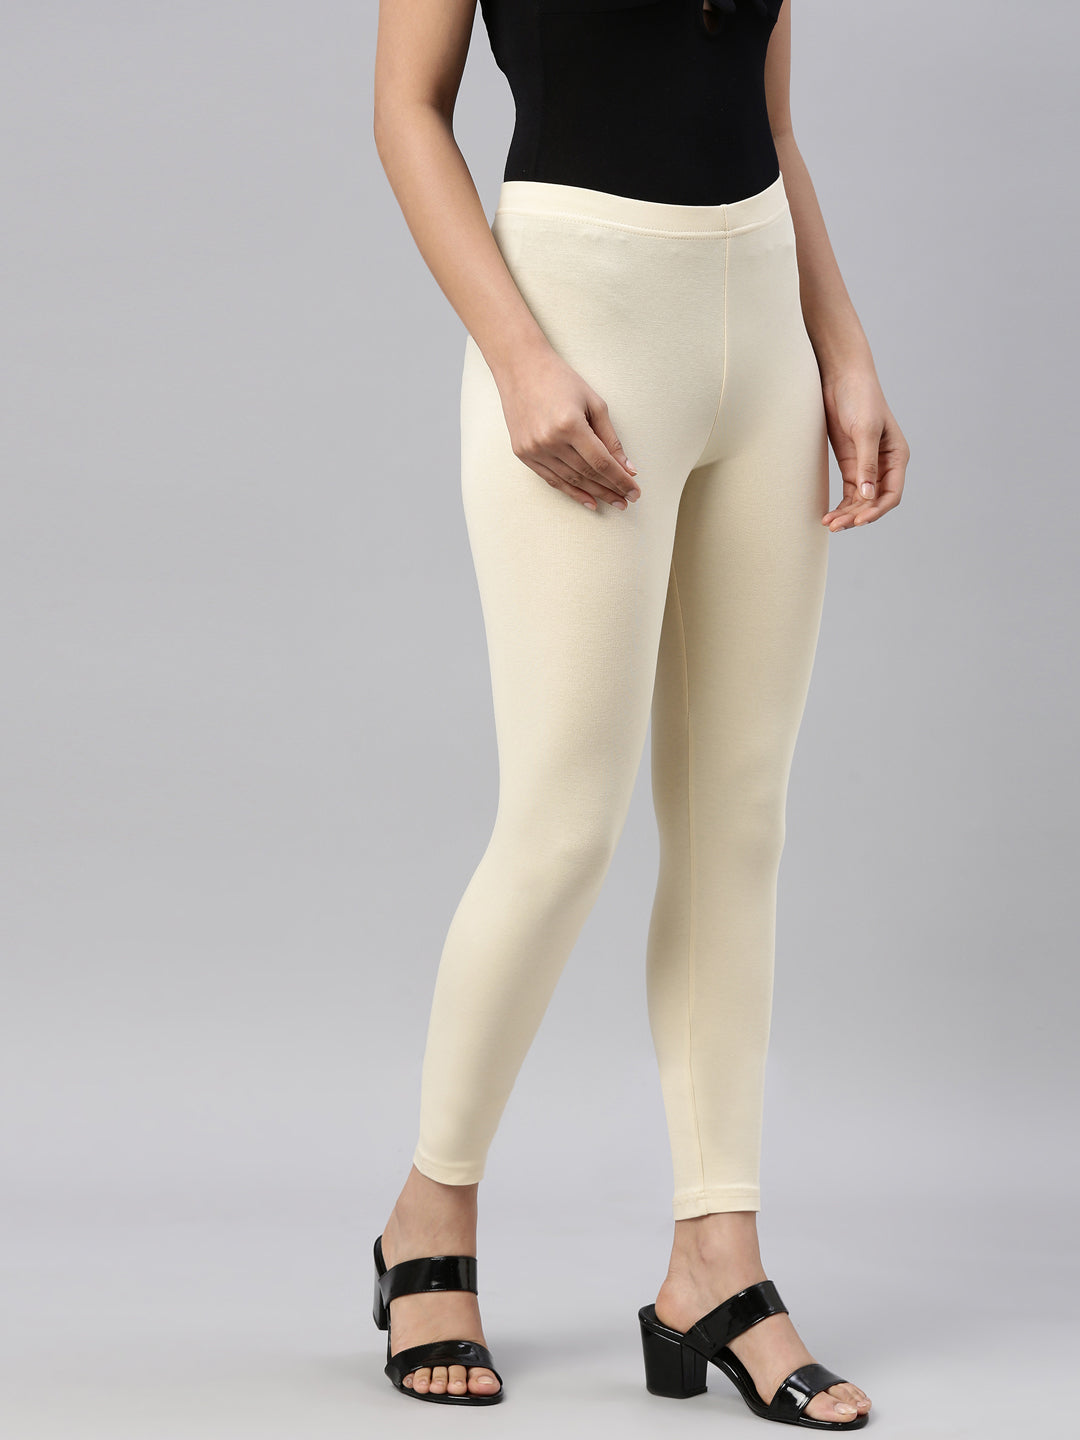 Go Colors White Solid Ankle-Length Leggings -, 399